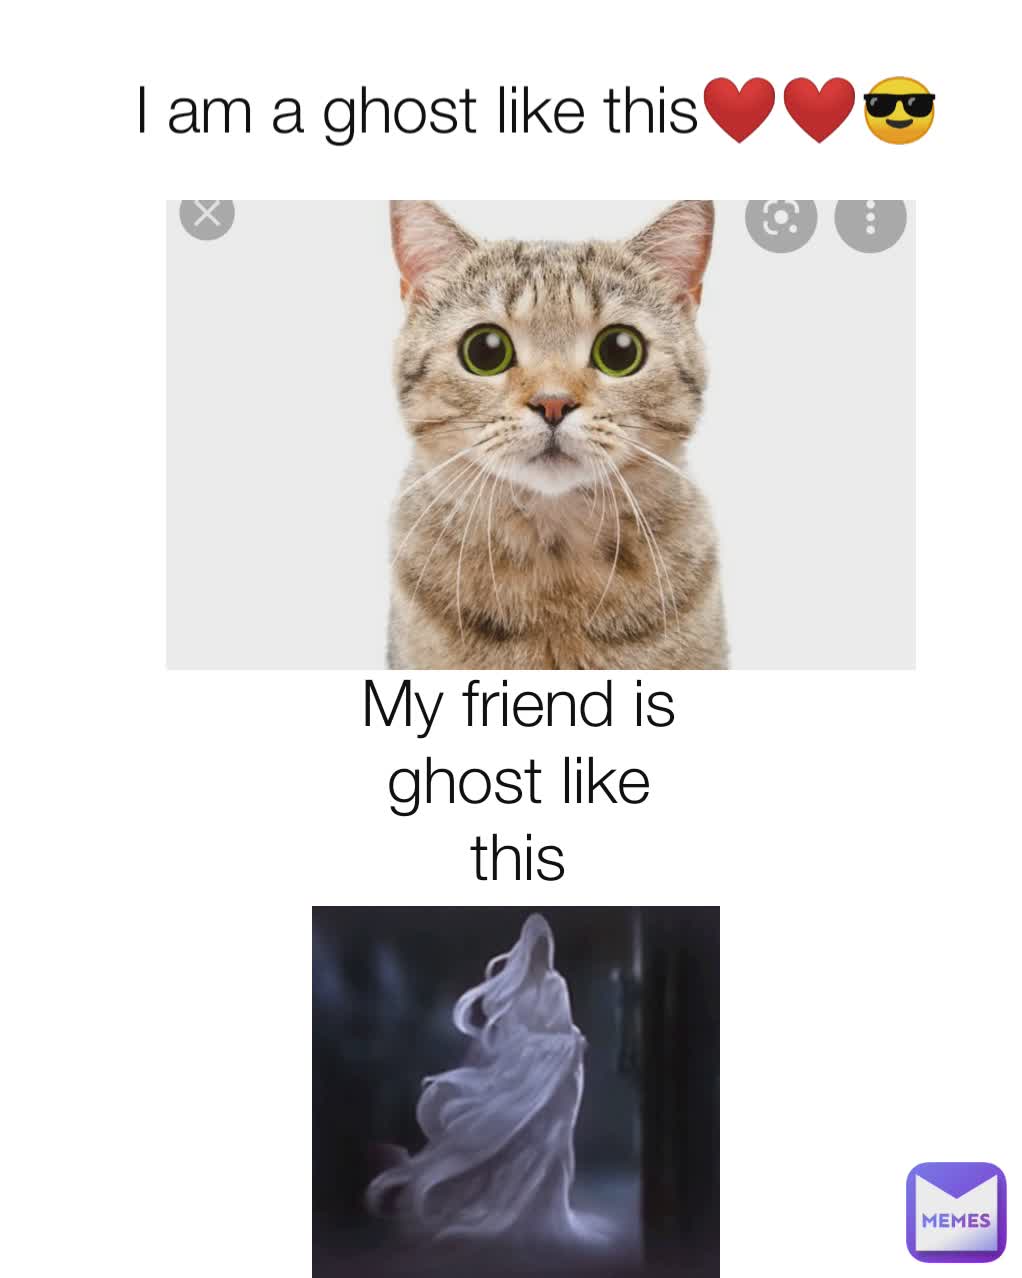 I am a ghost like this❤️❤️😎 My friend is ghost like this